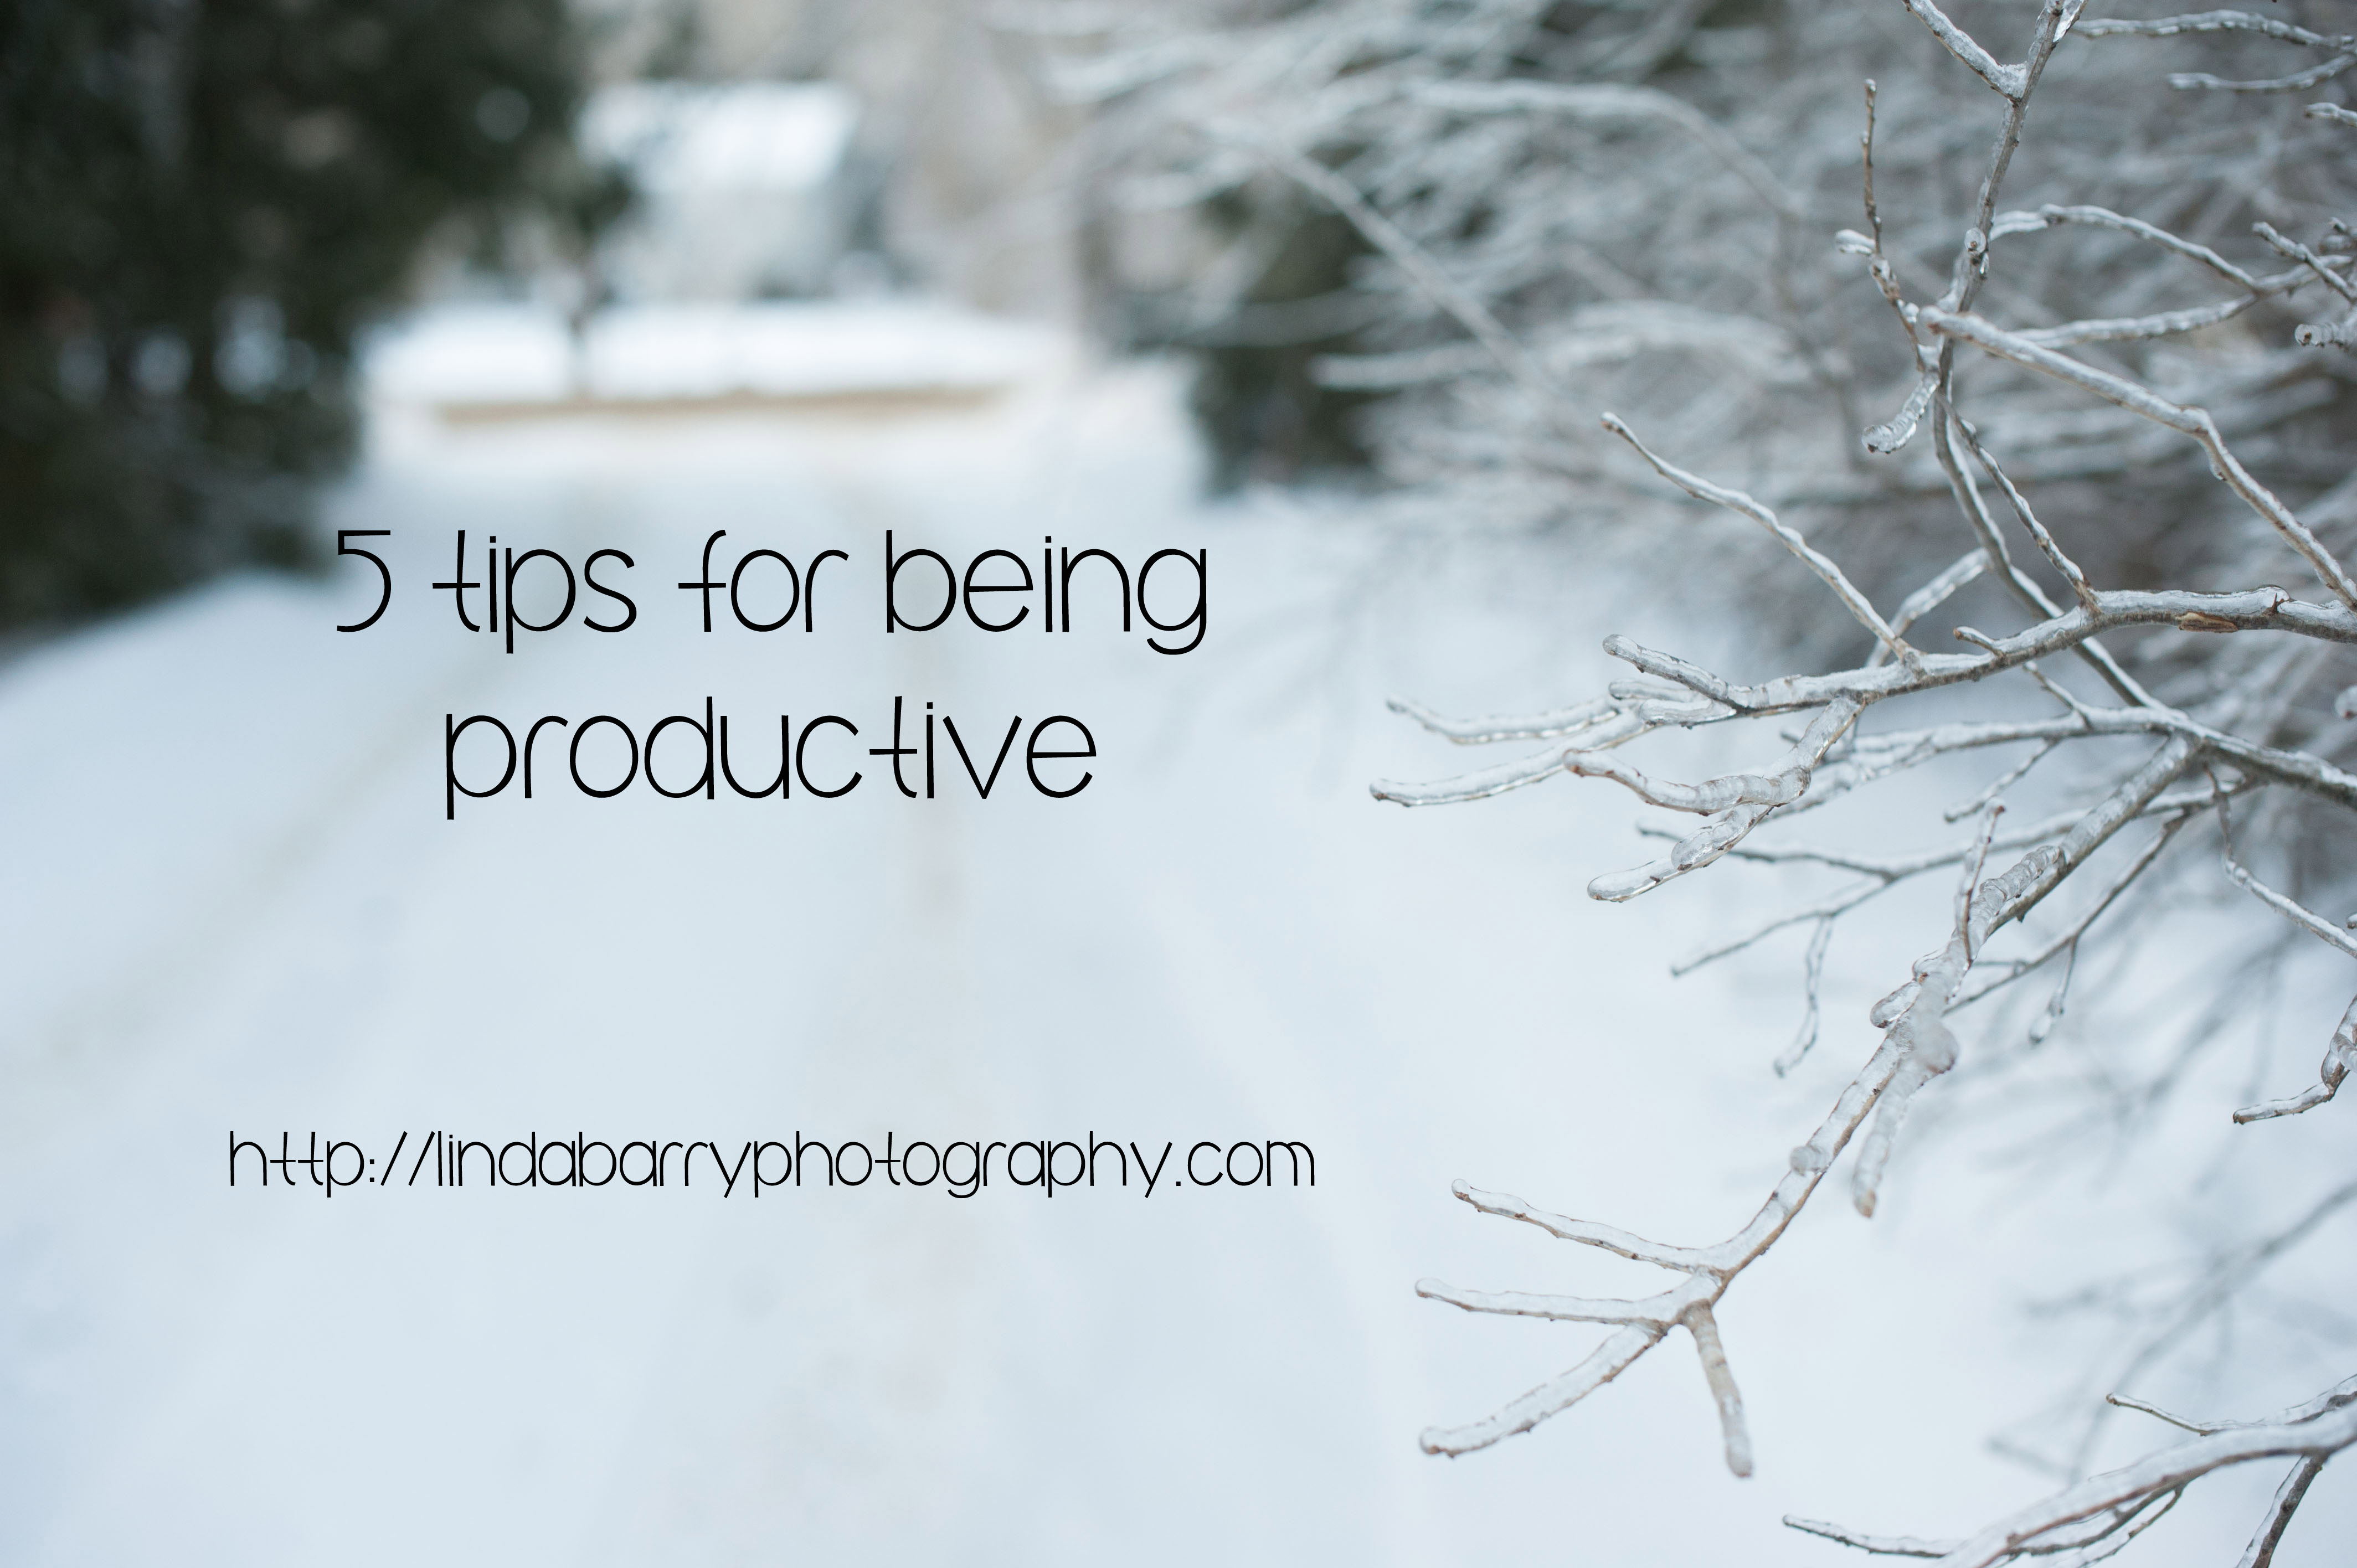 5 tips for being productive, productive, portland maine